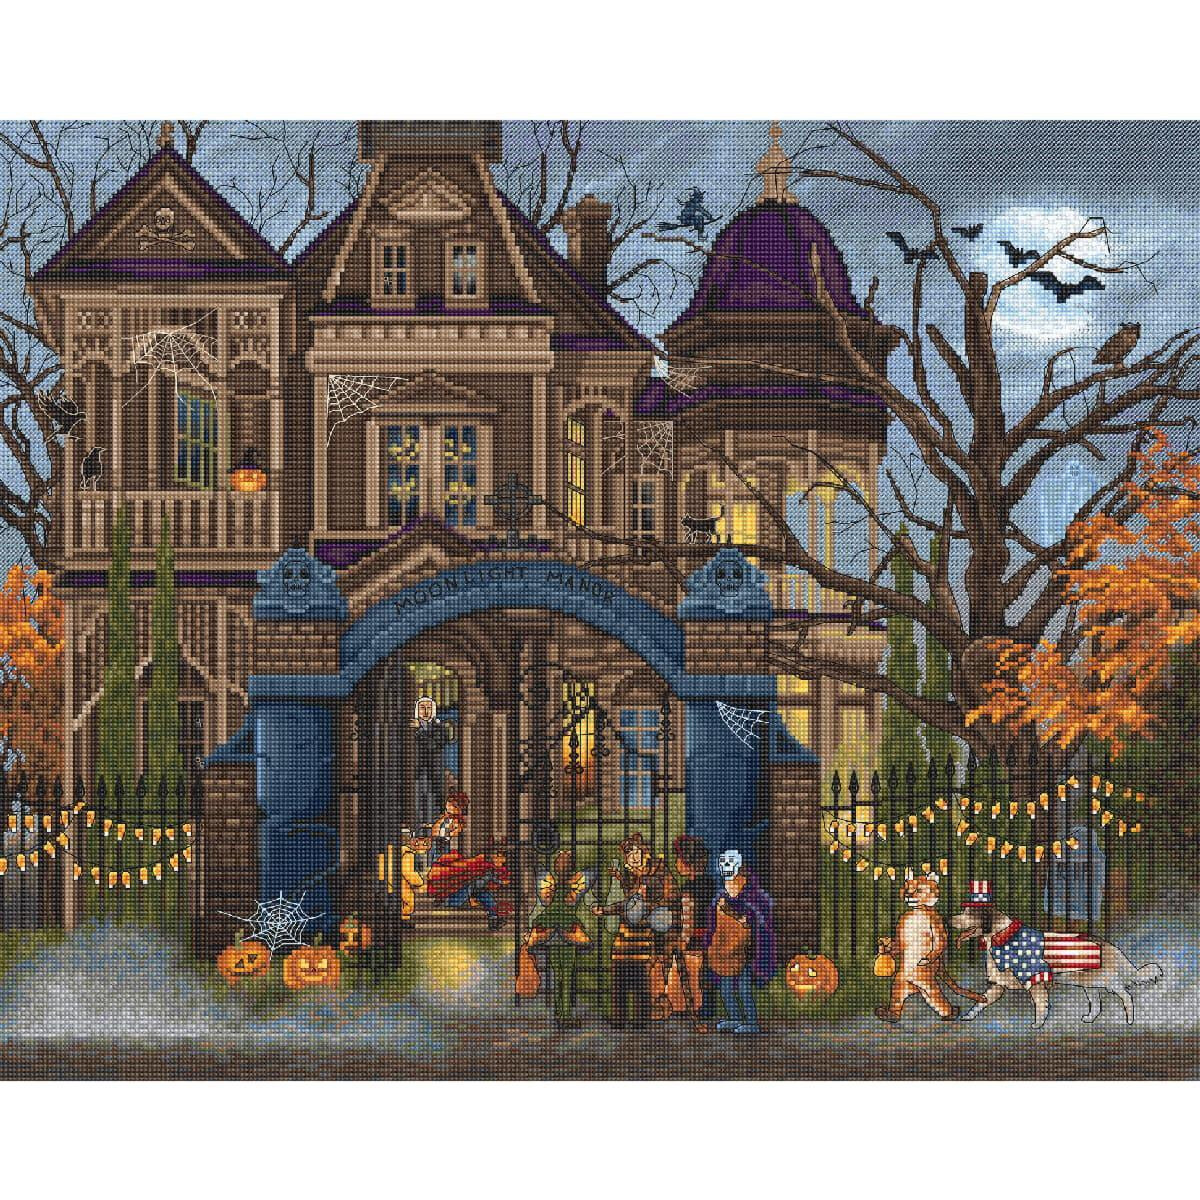 Letistitch counted cross stitch kit "Moonlight...